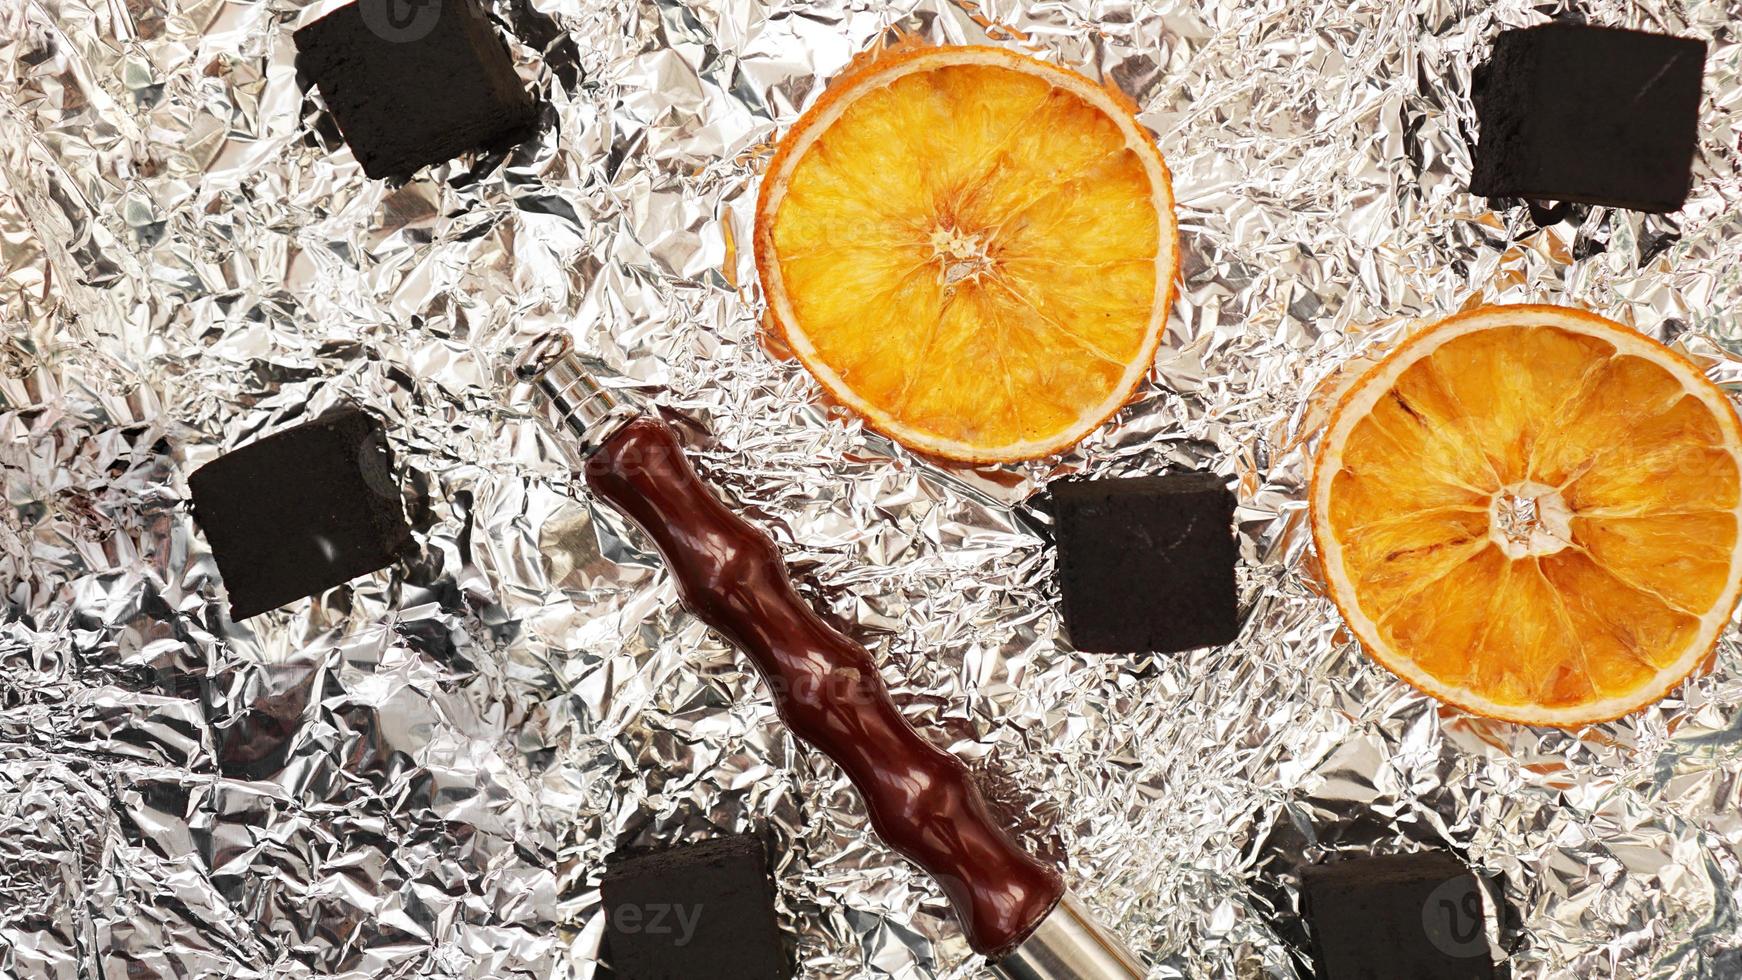 Coals for hookah on foil background with dry oranges photo